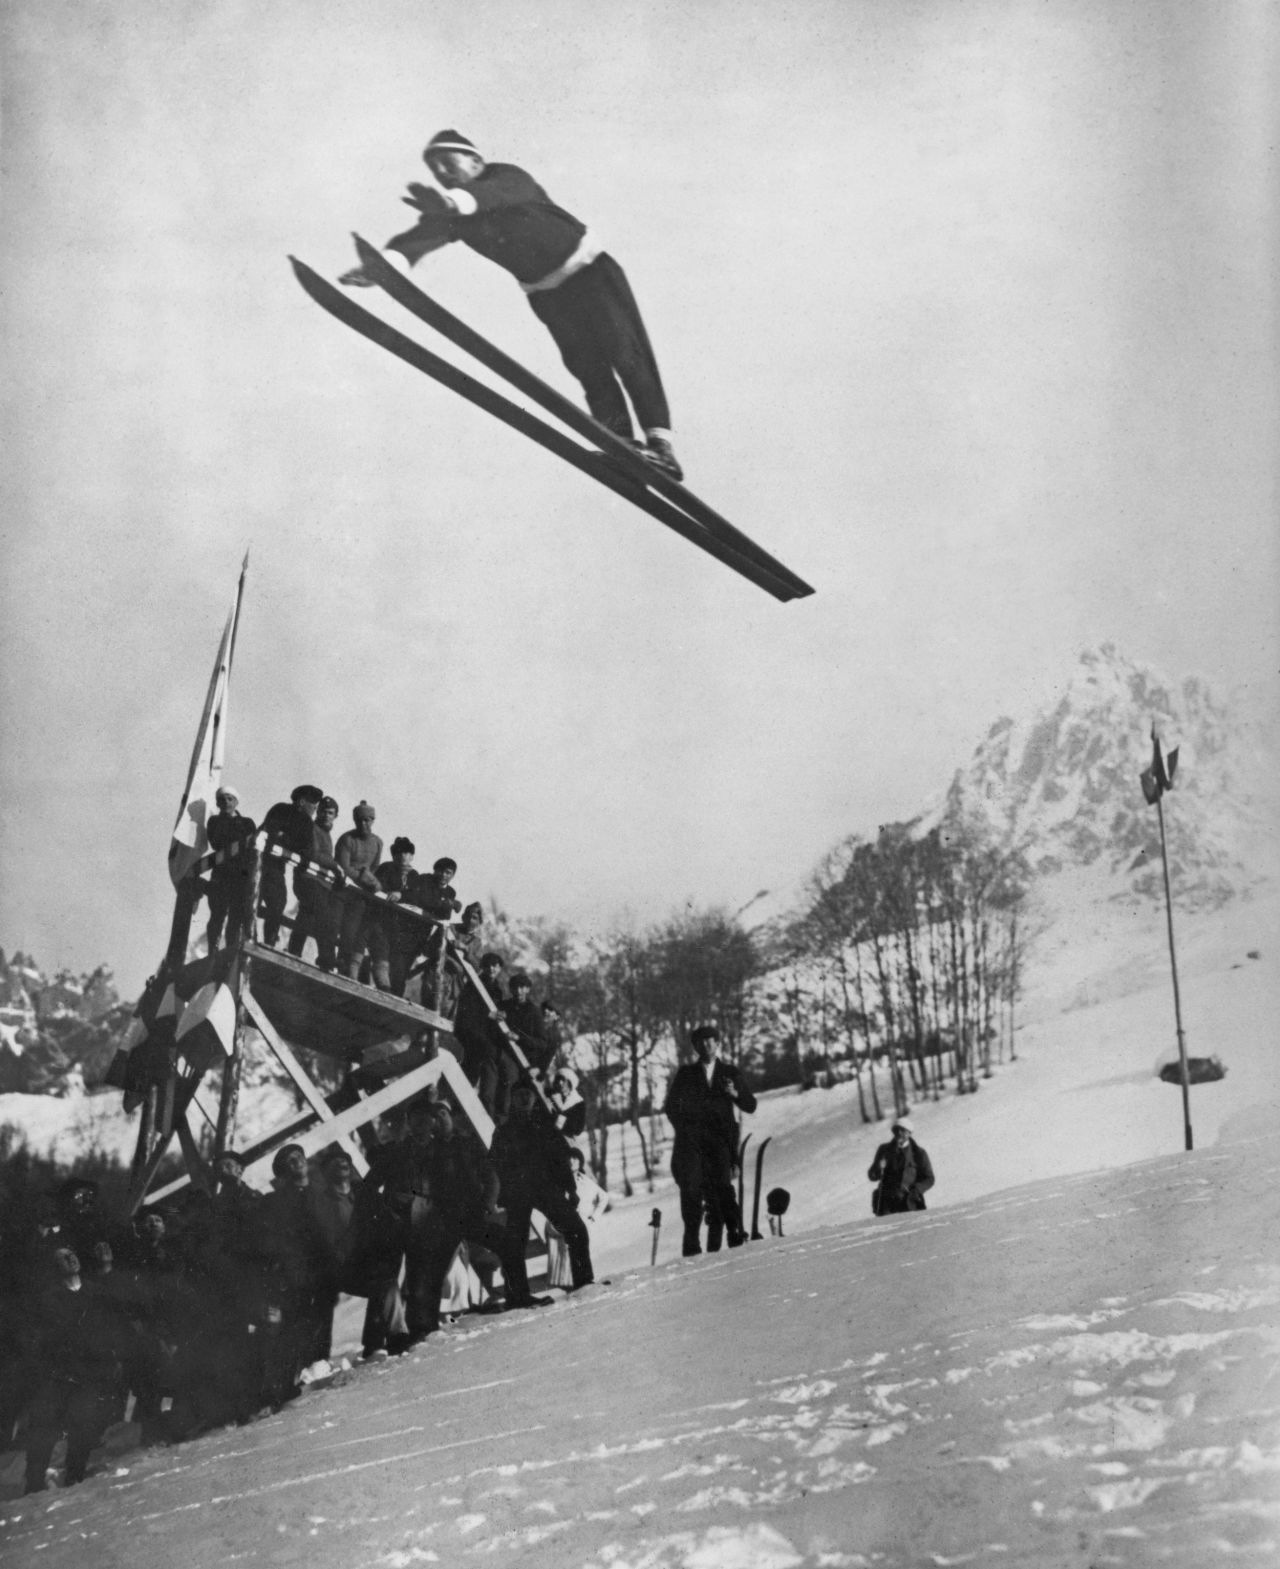 Norwegian ski jumper Jacob Tullin Thams takes flight as he competes in the first-ever Winter Olympics in 1924. He won gold in the individual large-hill event.